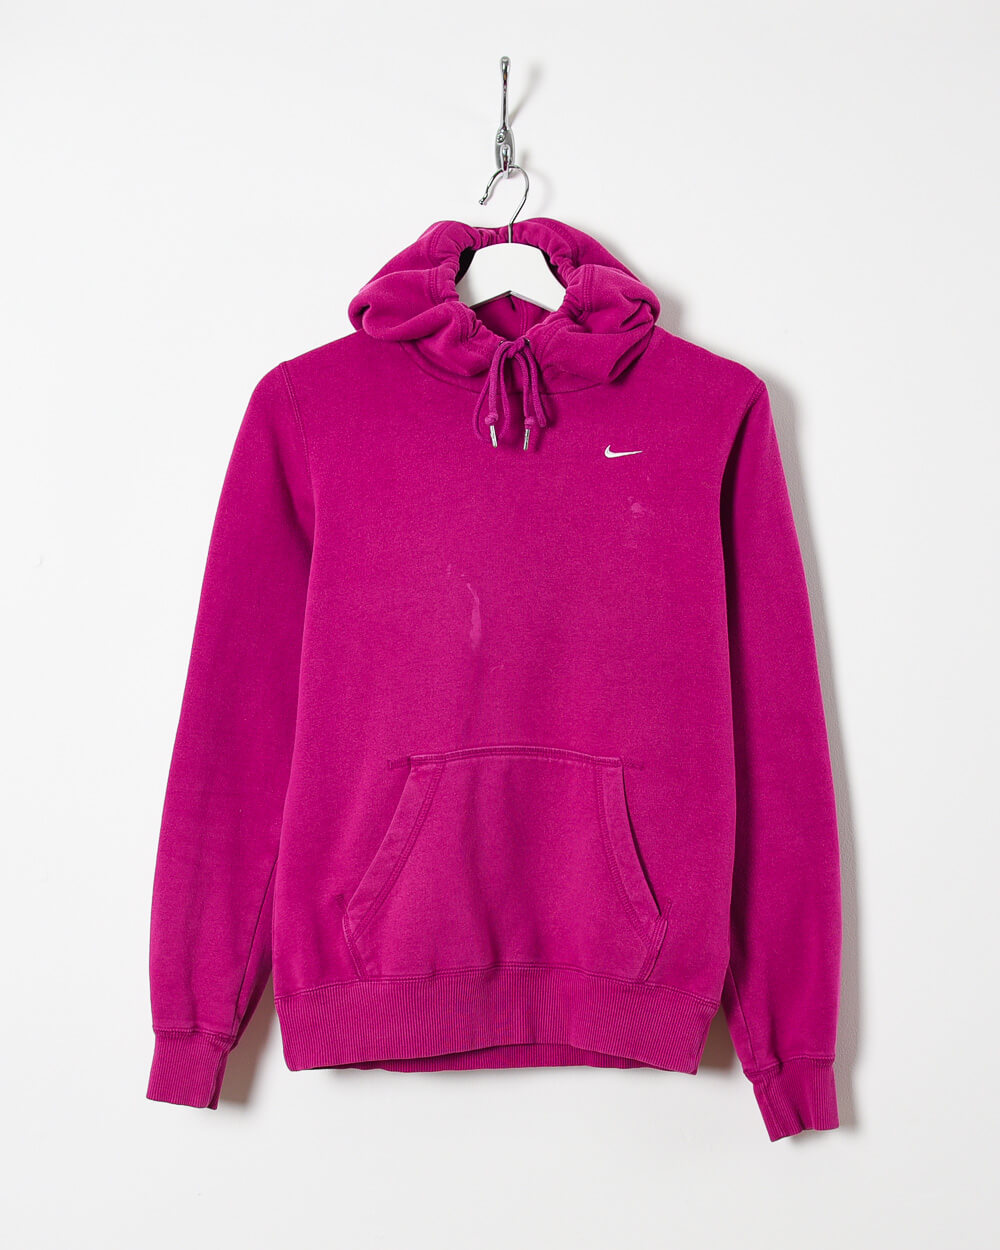 Nike Women's Hoodie - Small - Domno Vintage 90s, 80s, 00s Retro and Vintage Clothing 